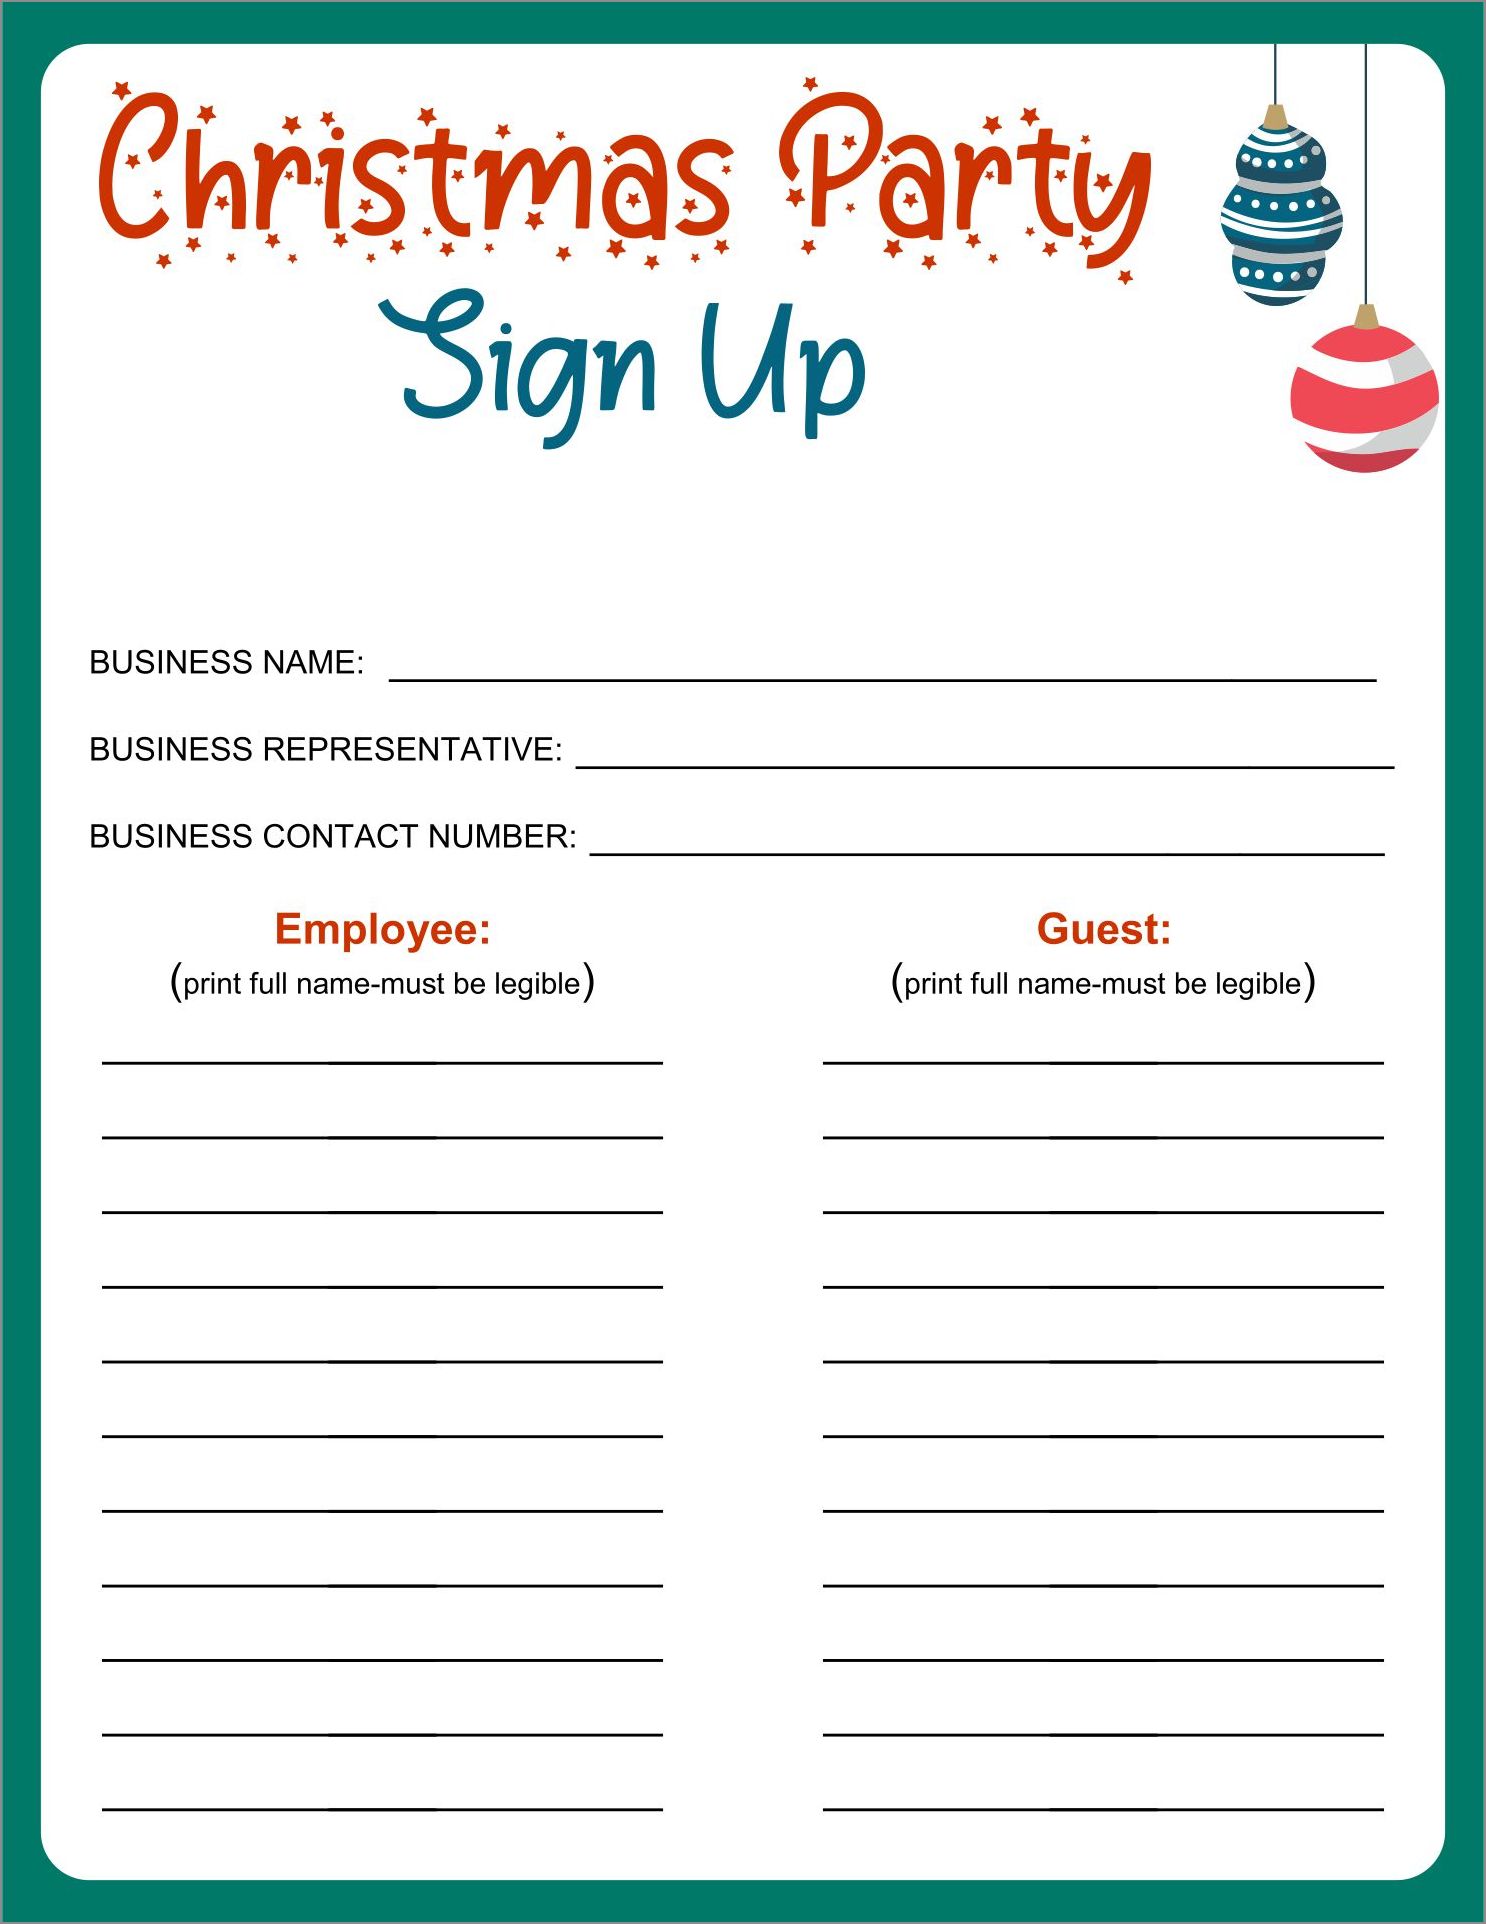 Christmas party sign up sheet template